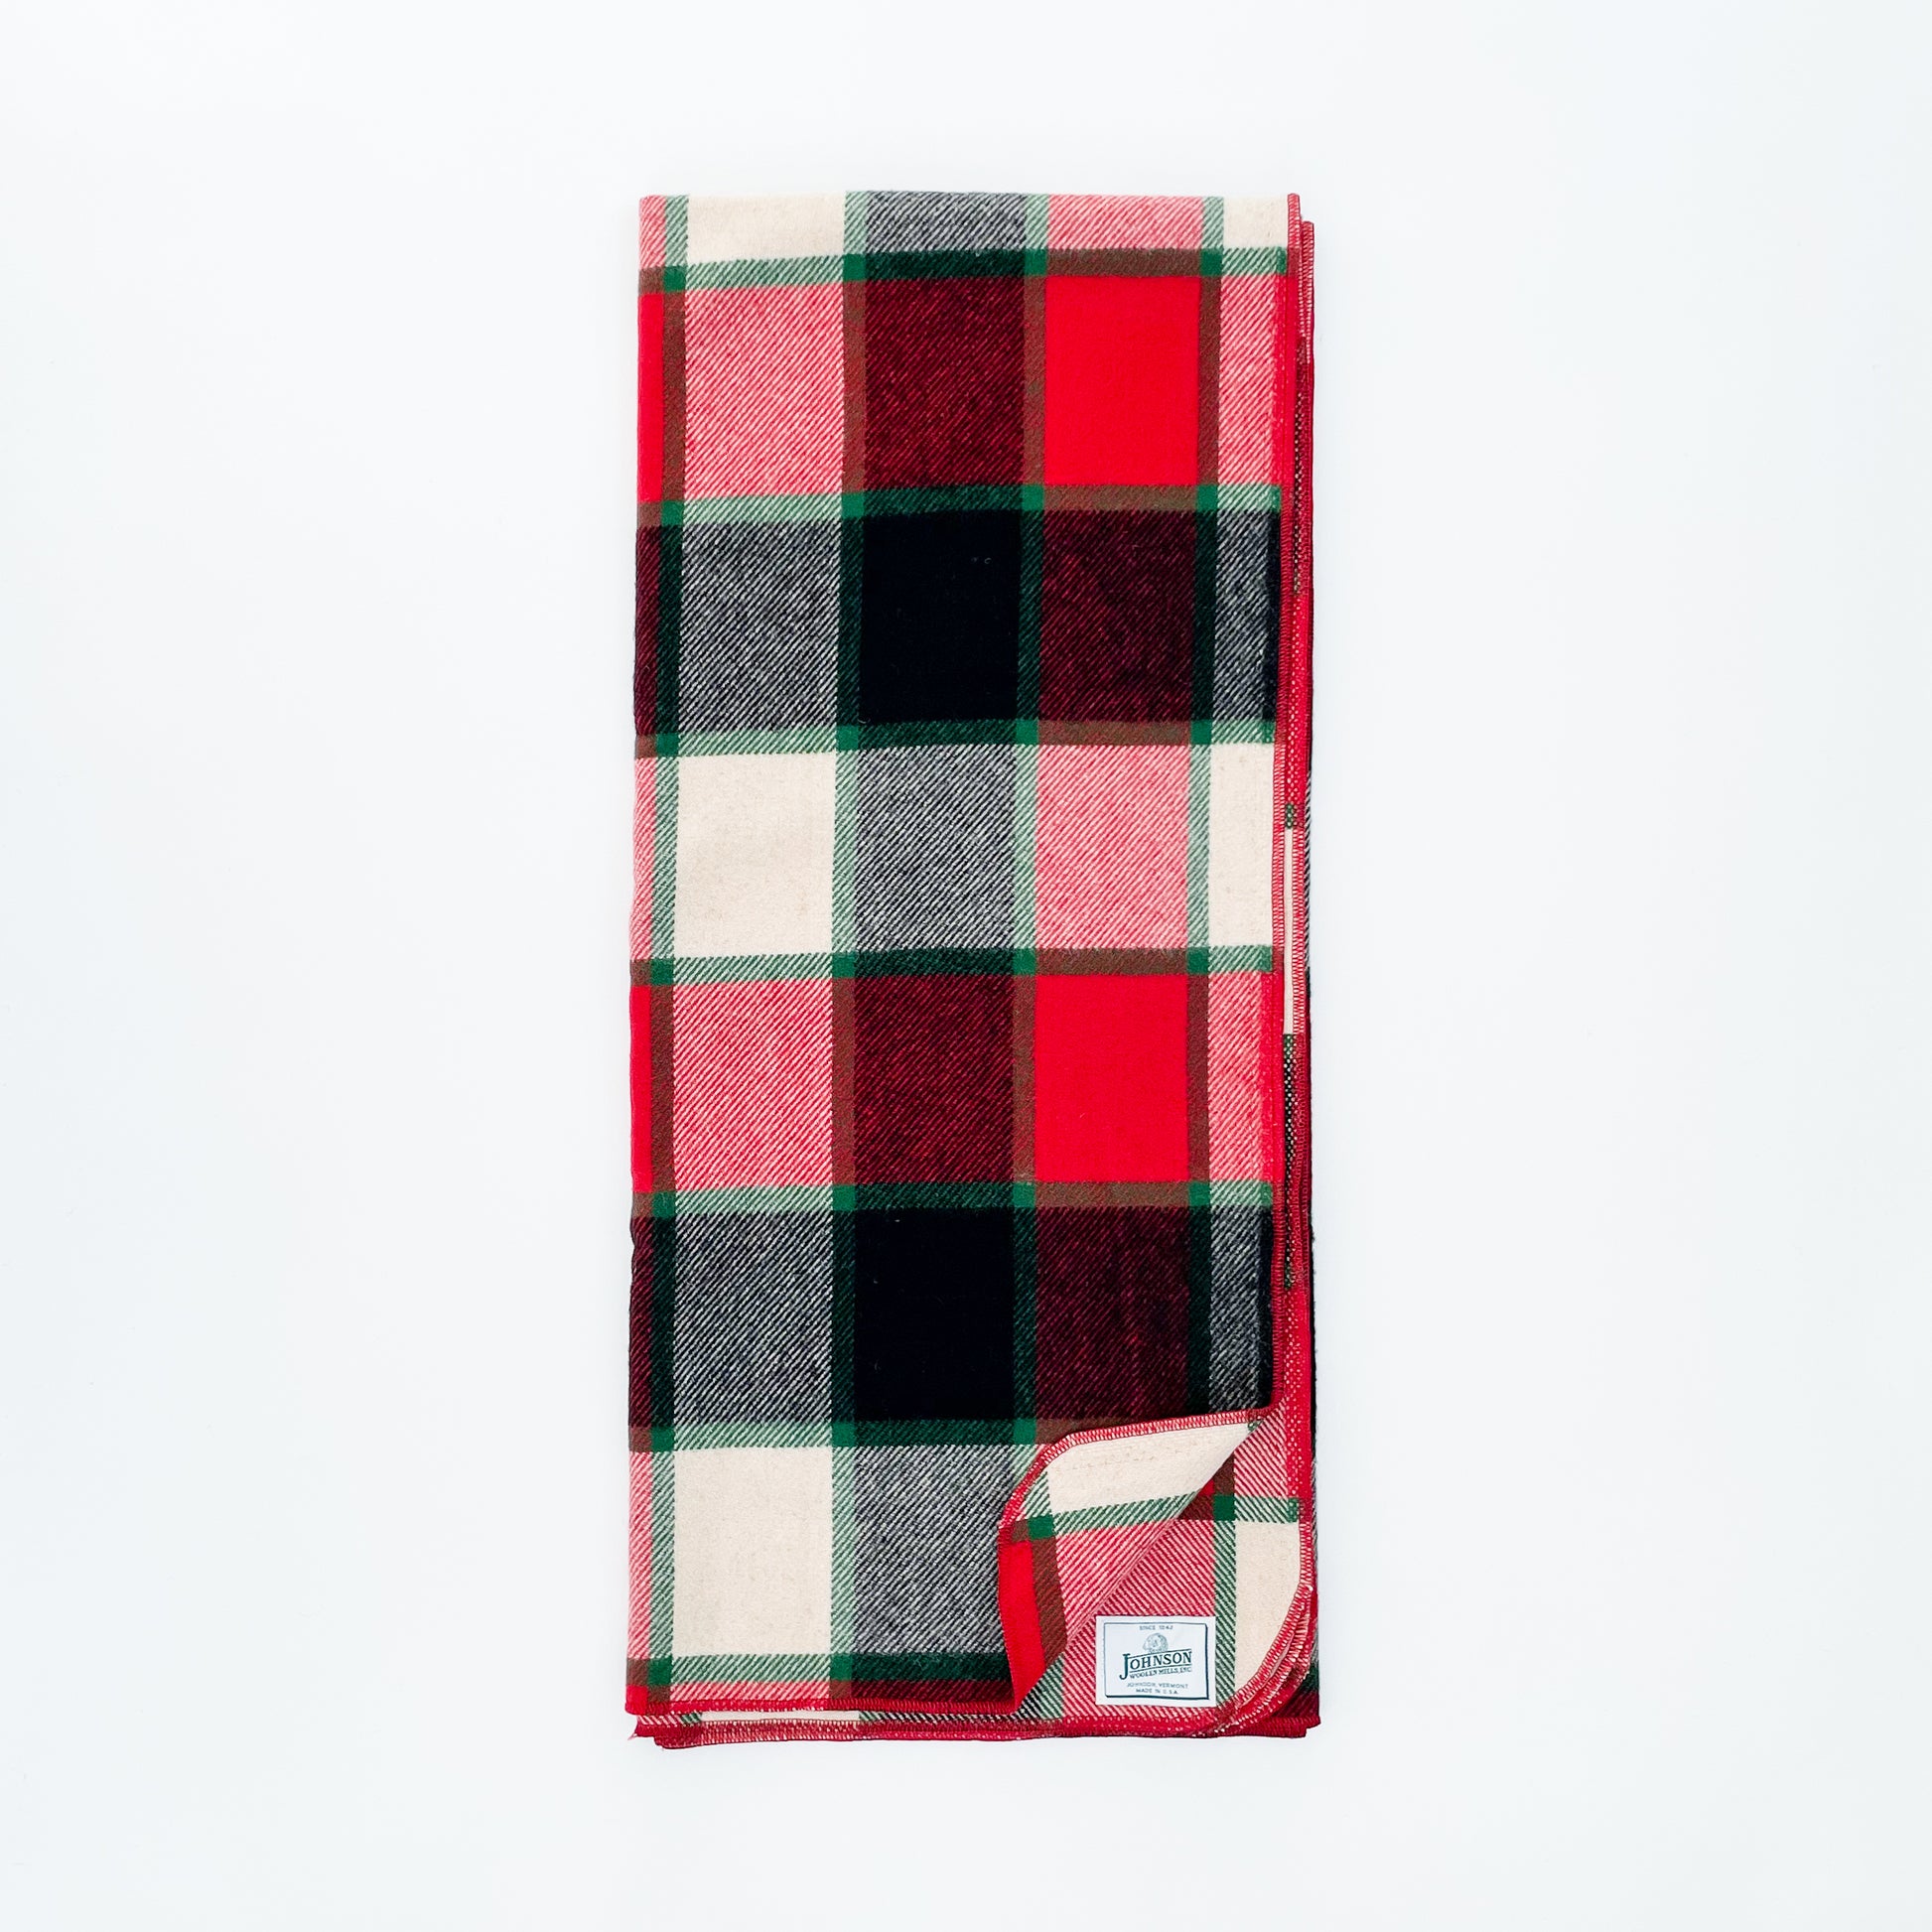 Johnson Woolen Mills Throw, Old Canadian Plaid, Rust/Green/Ivory/Black Plaid, unfolded view